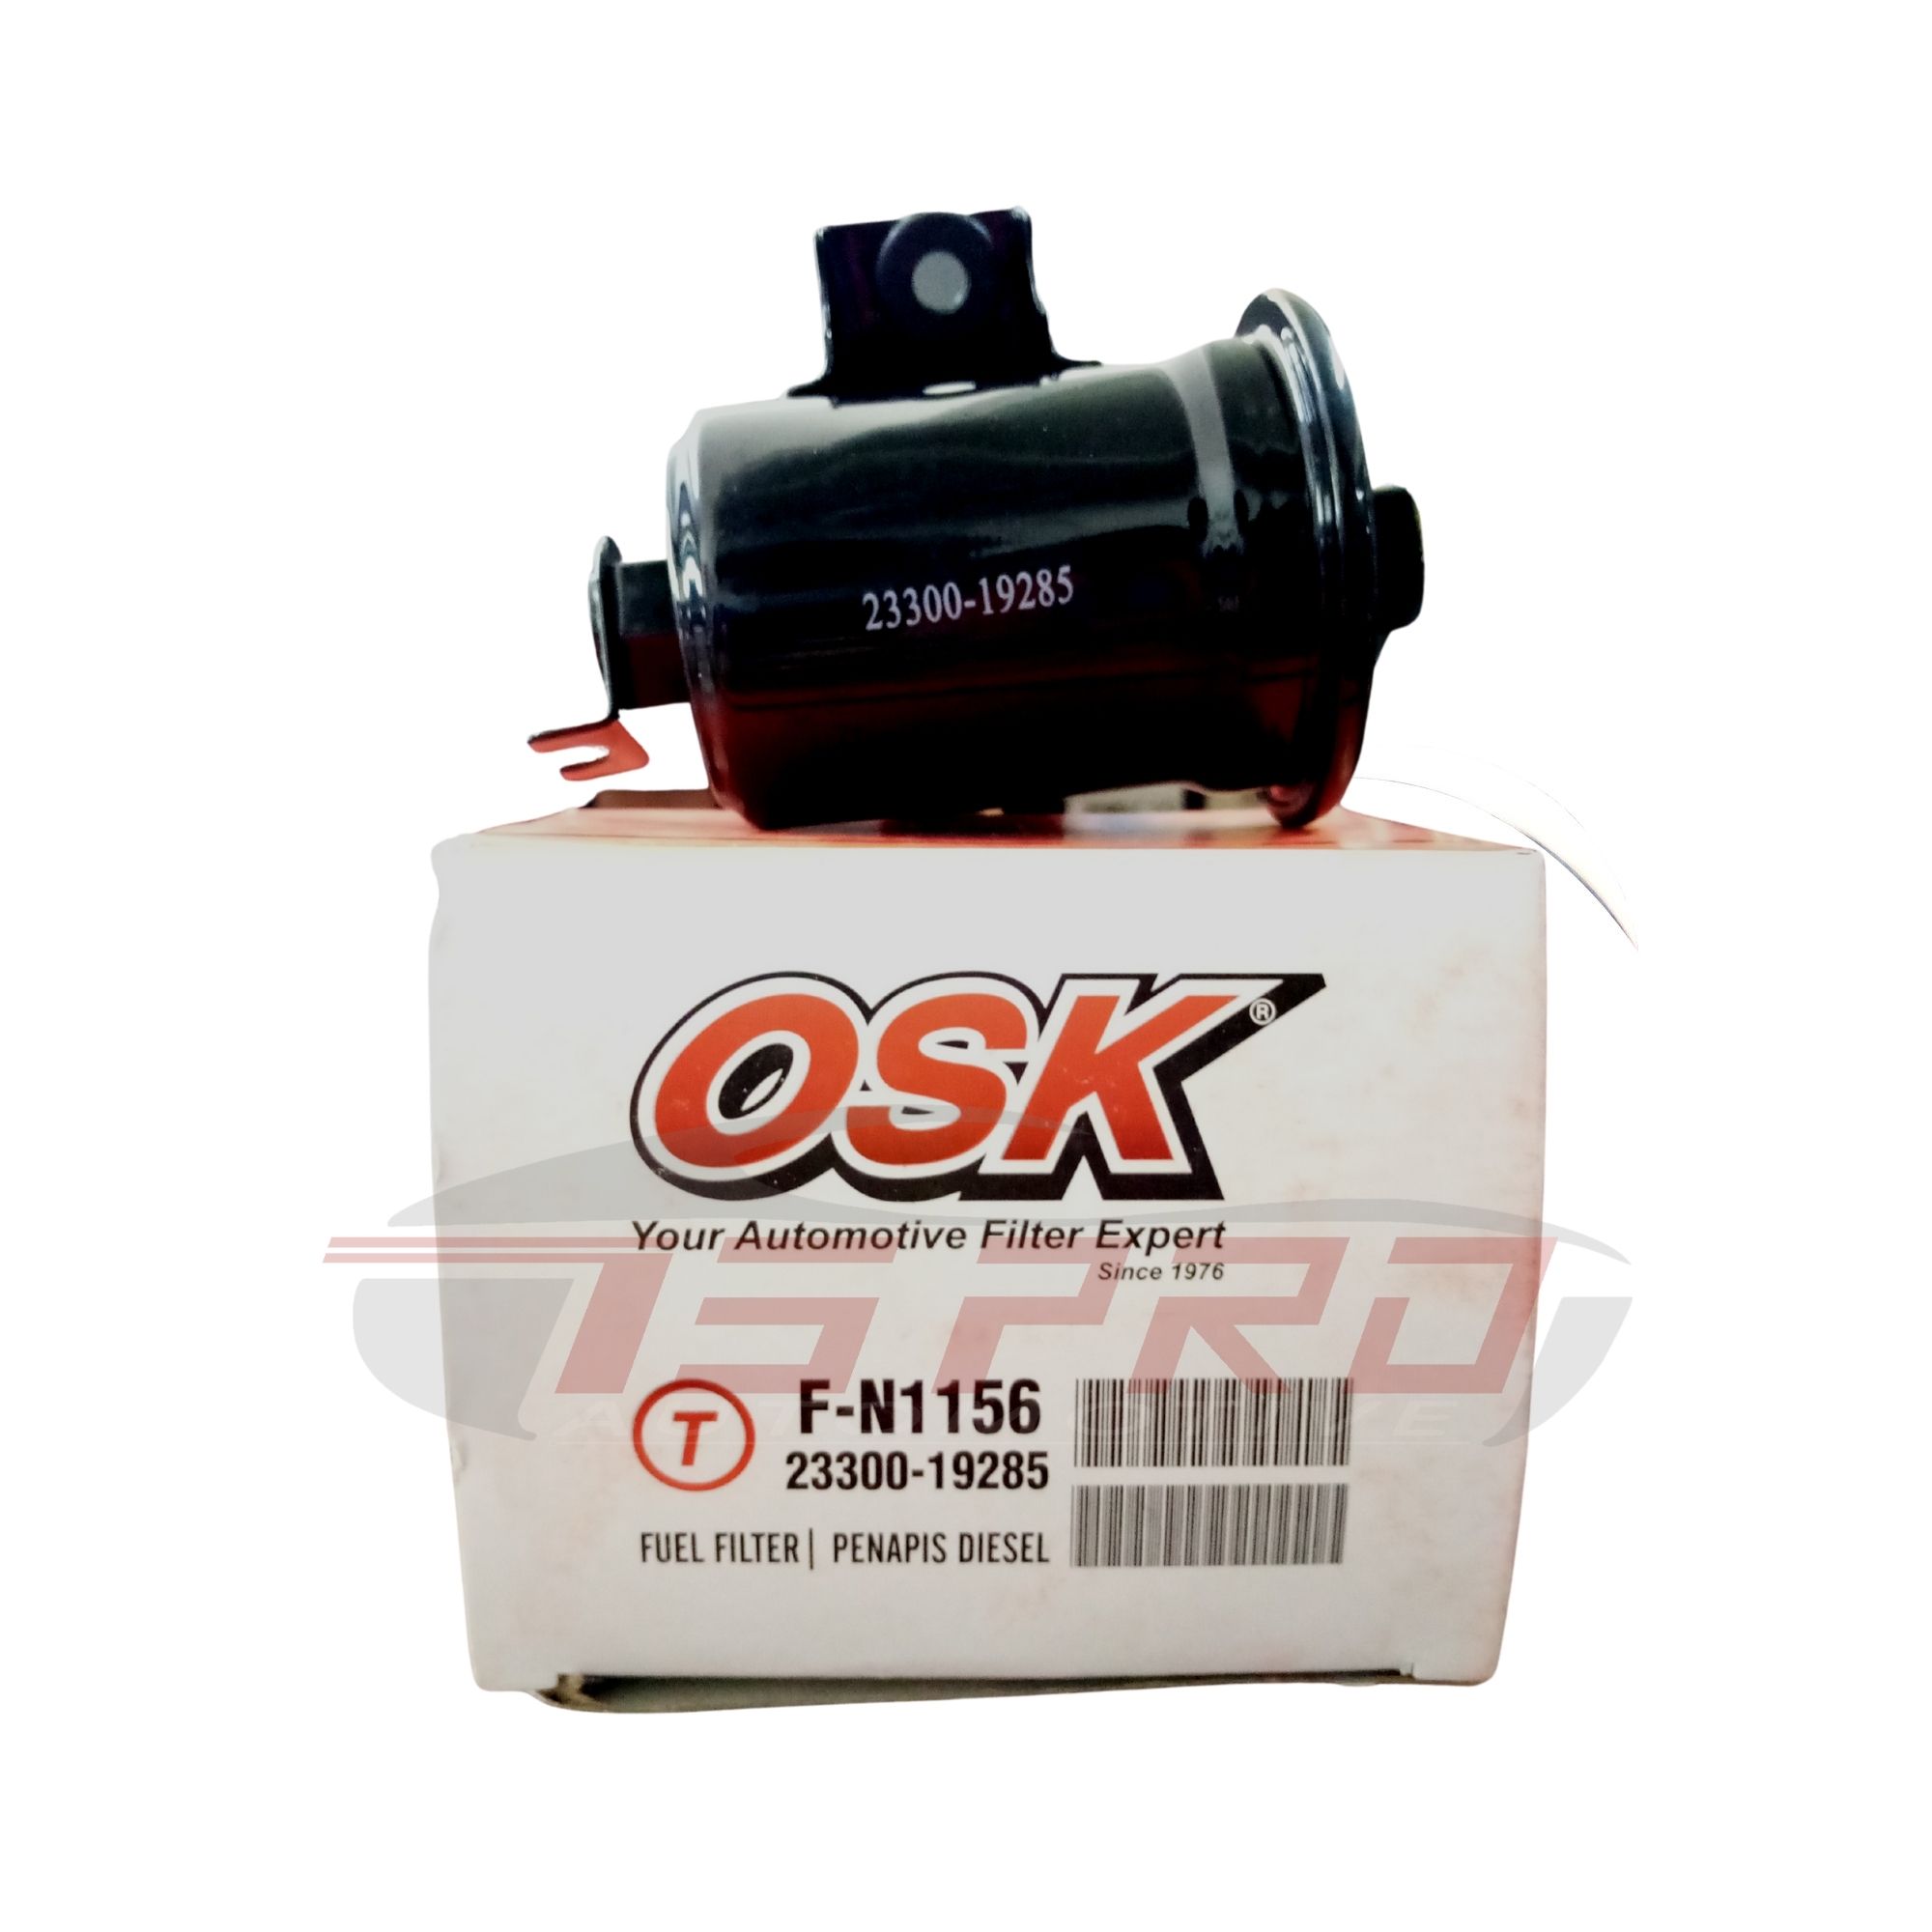 TOYOTA COROLLA GENUINE OEM FUEL FILTER 23300-19285 FOR JAPONESE VERSIONS 